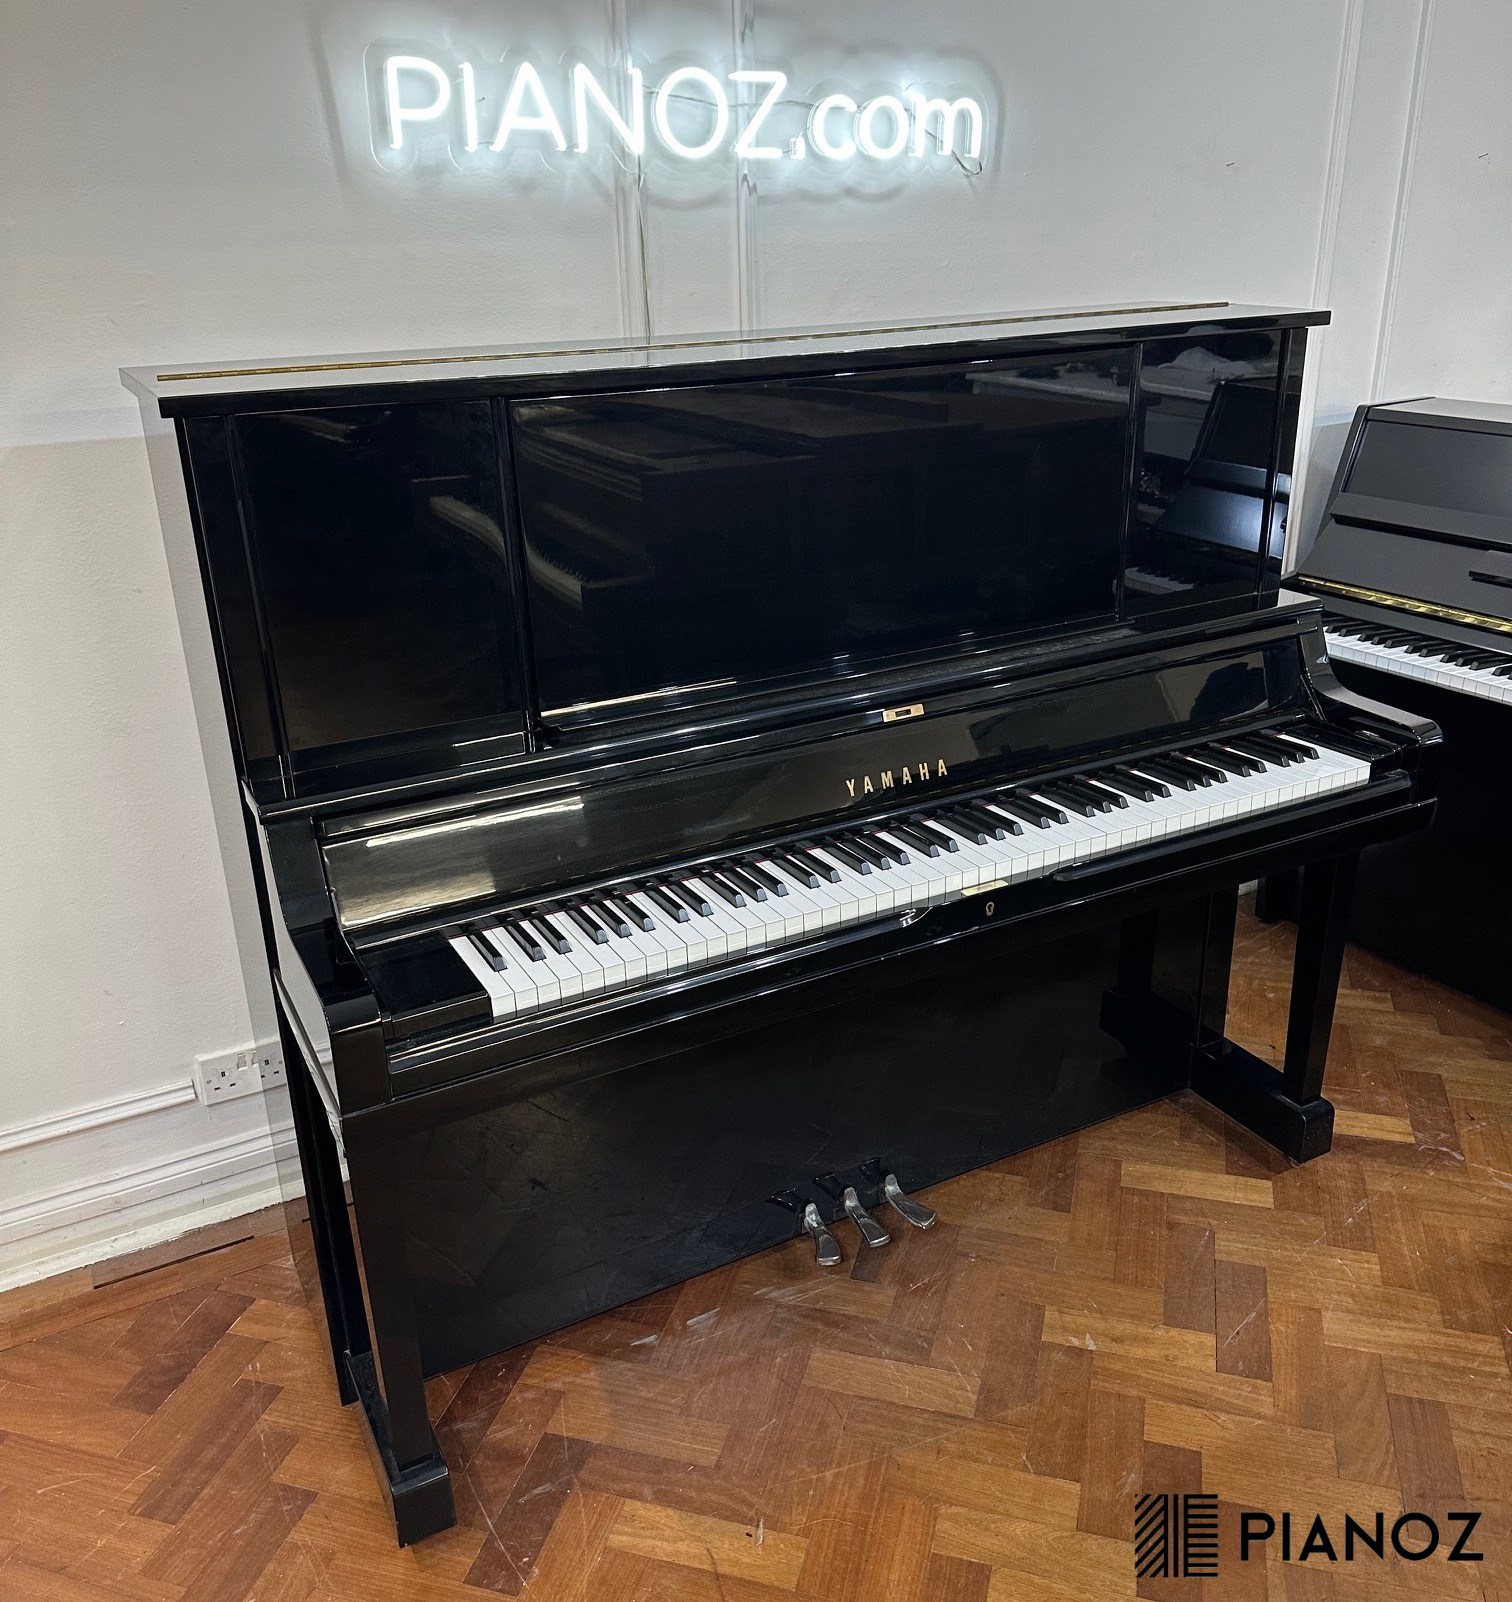 Yamaha U5 UX5 1993 Upright Piano piano for sale in UK